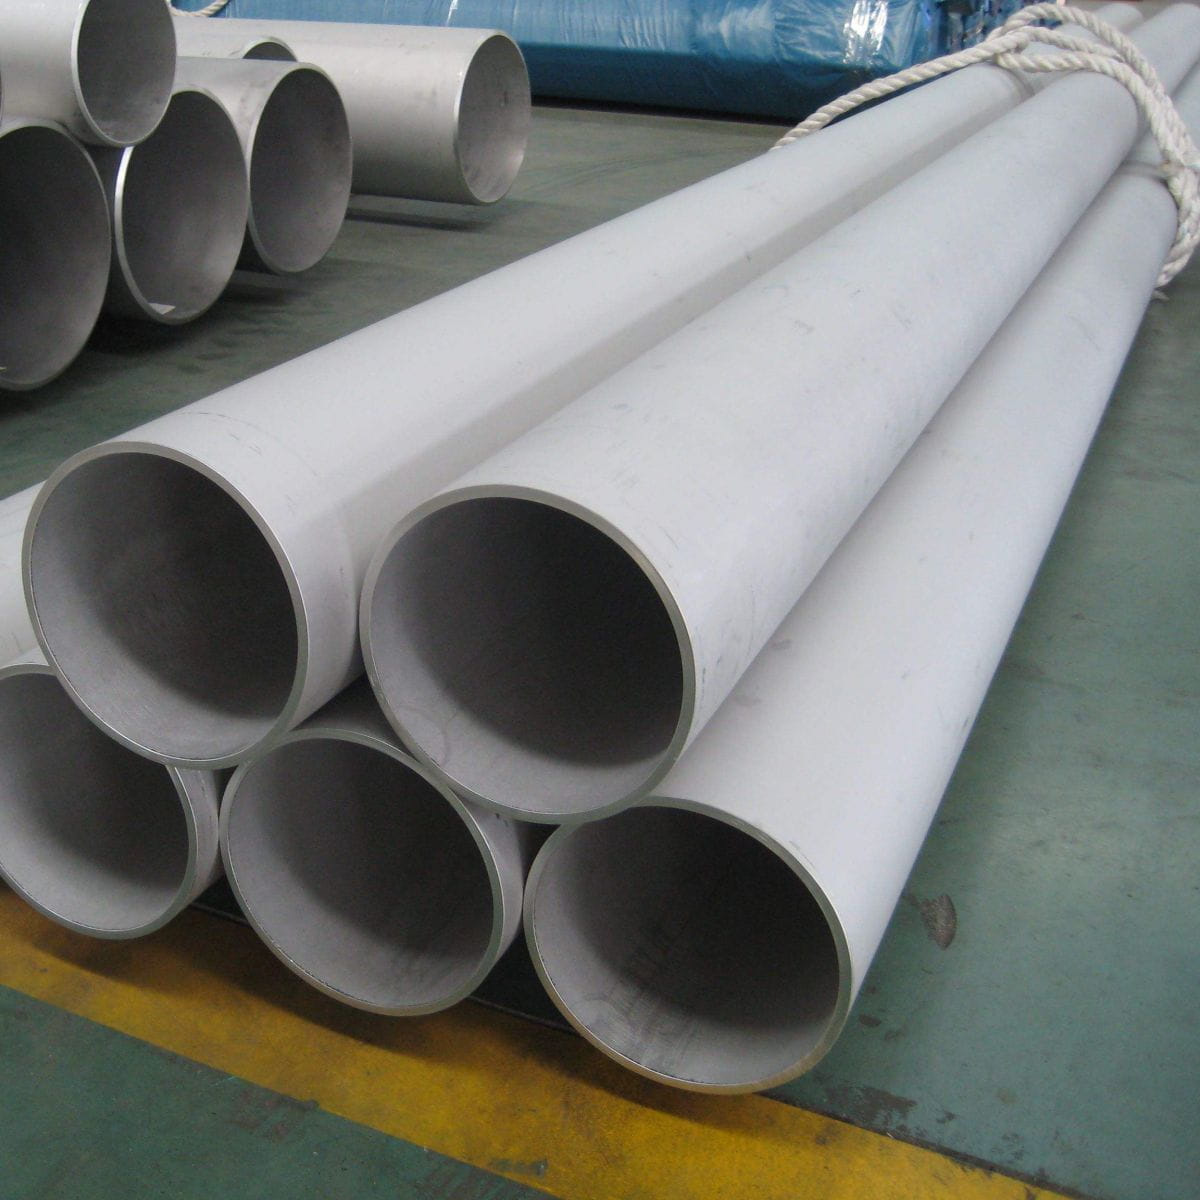 ASTM A312 TP304L Stainless Steel Pipe, ASME B36.19M, SCH 40S